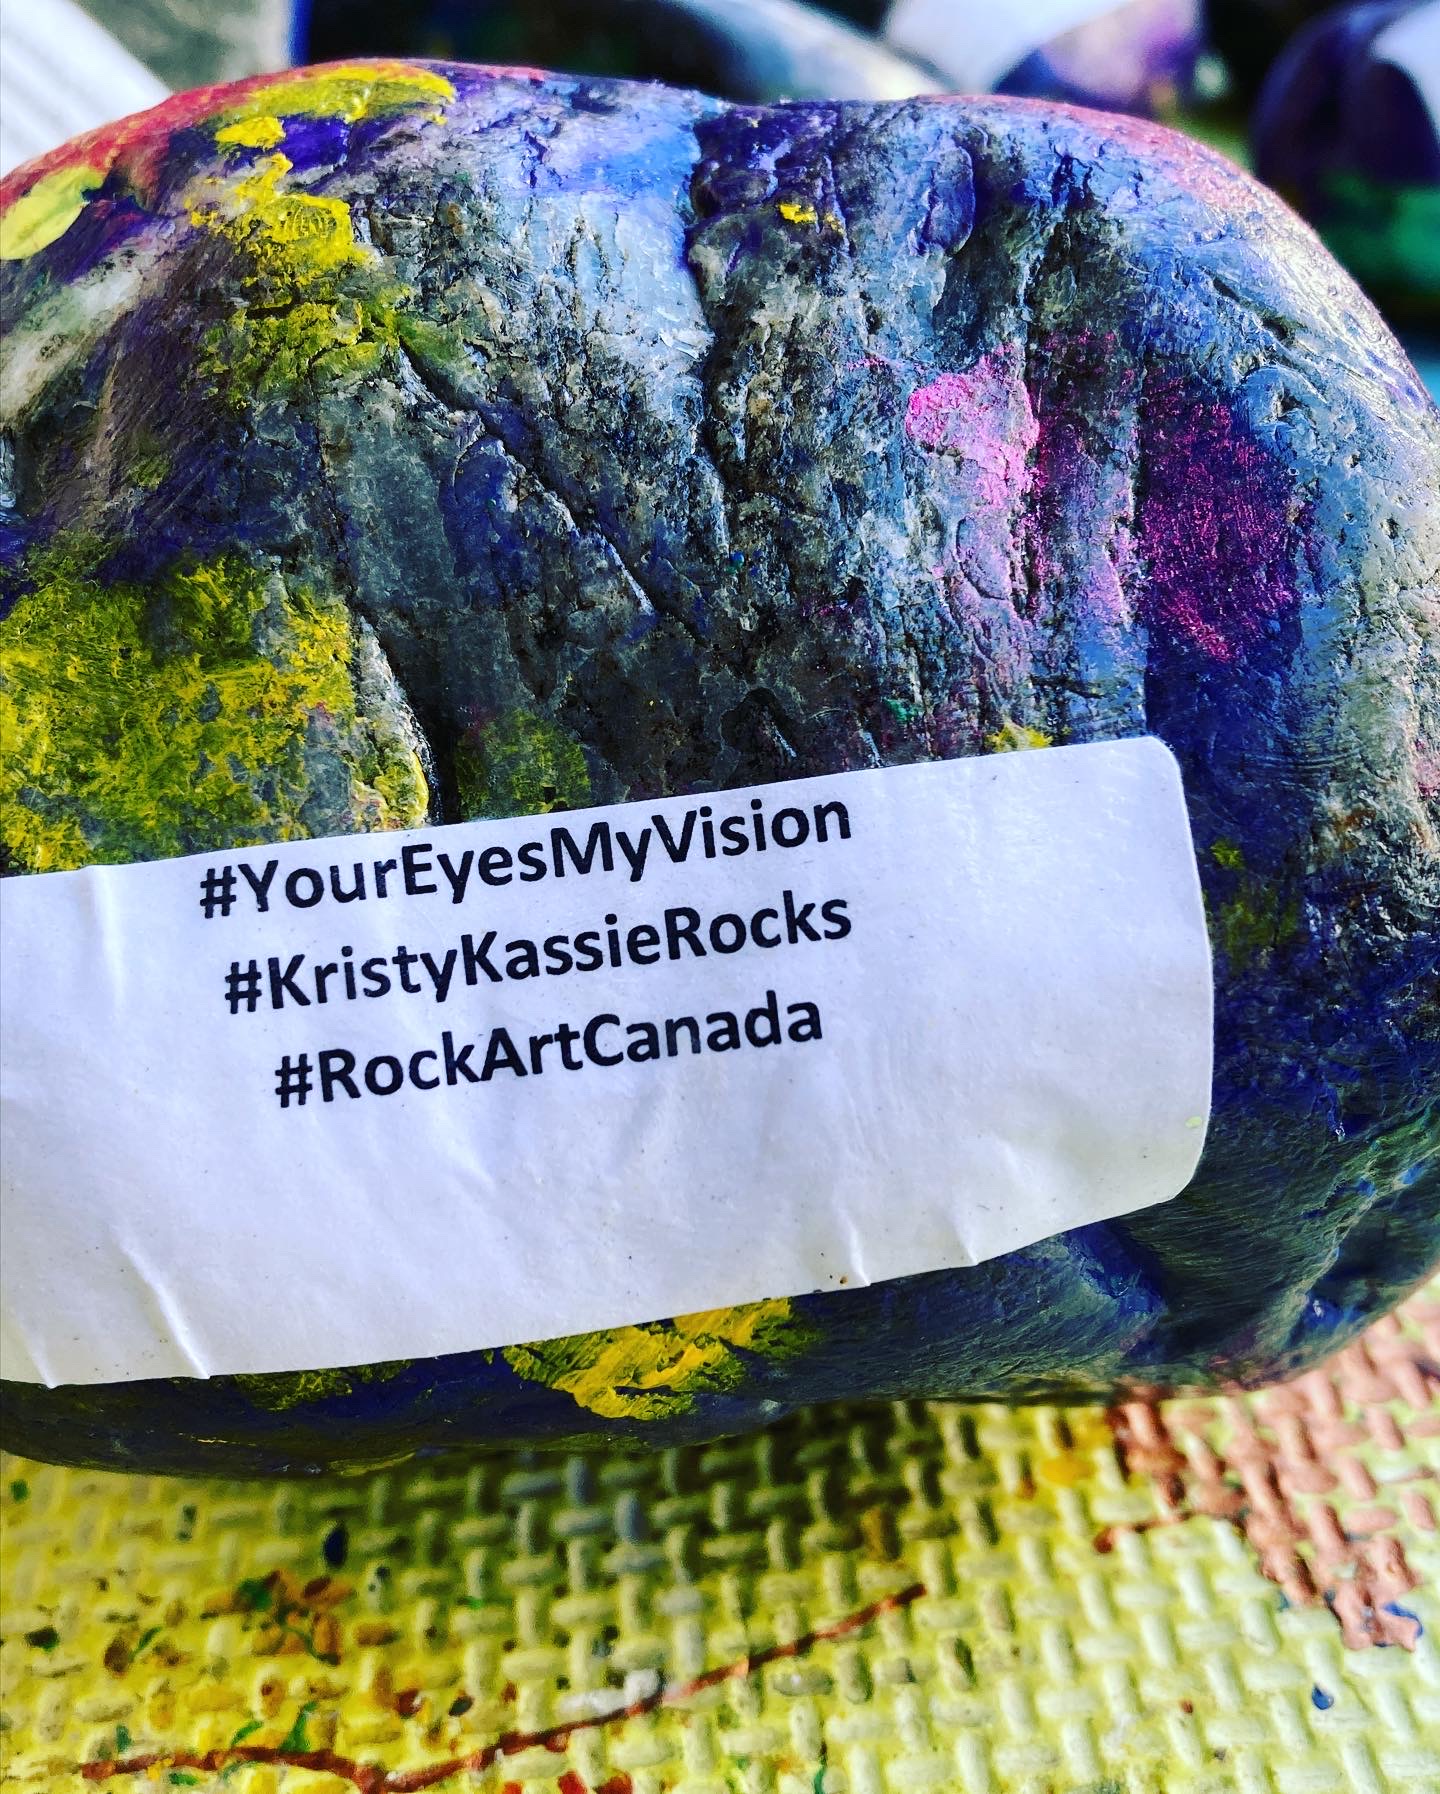 About 30 rocks are labelled with the hashtags Your Eyes My Vision, Kristy Kassie Rocks and Sunflowers for Ukraine.